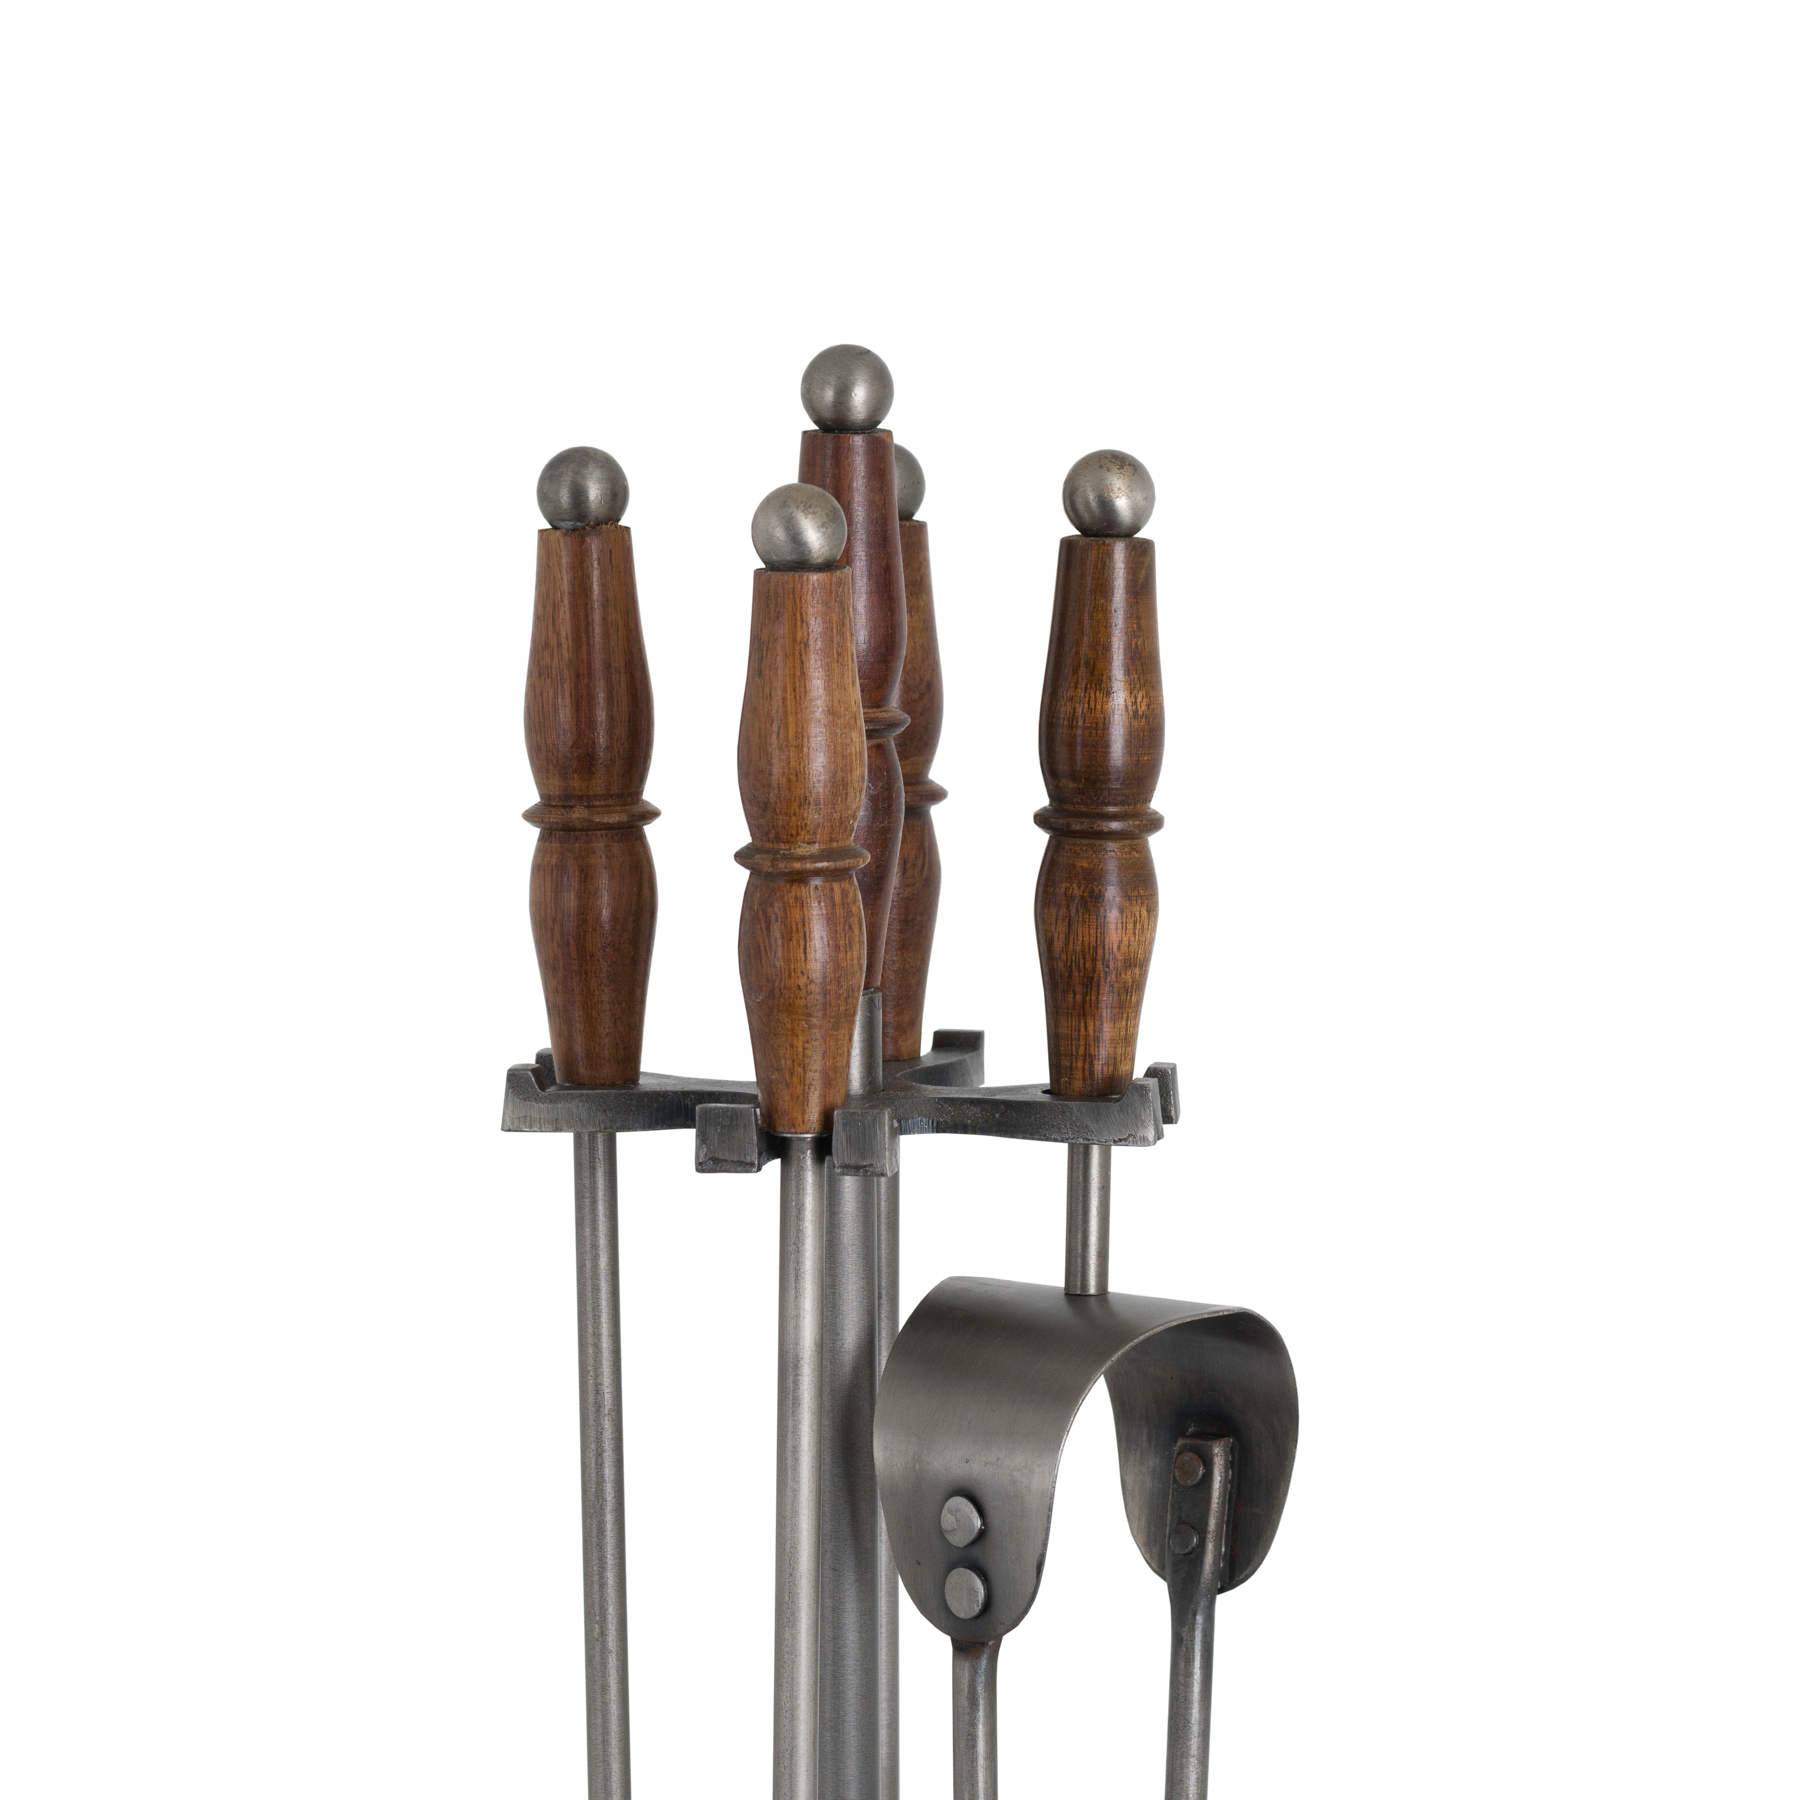 Hand Turned Fire Companion Set In Antique Pewter With Wooden Handles - Image 2